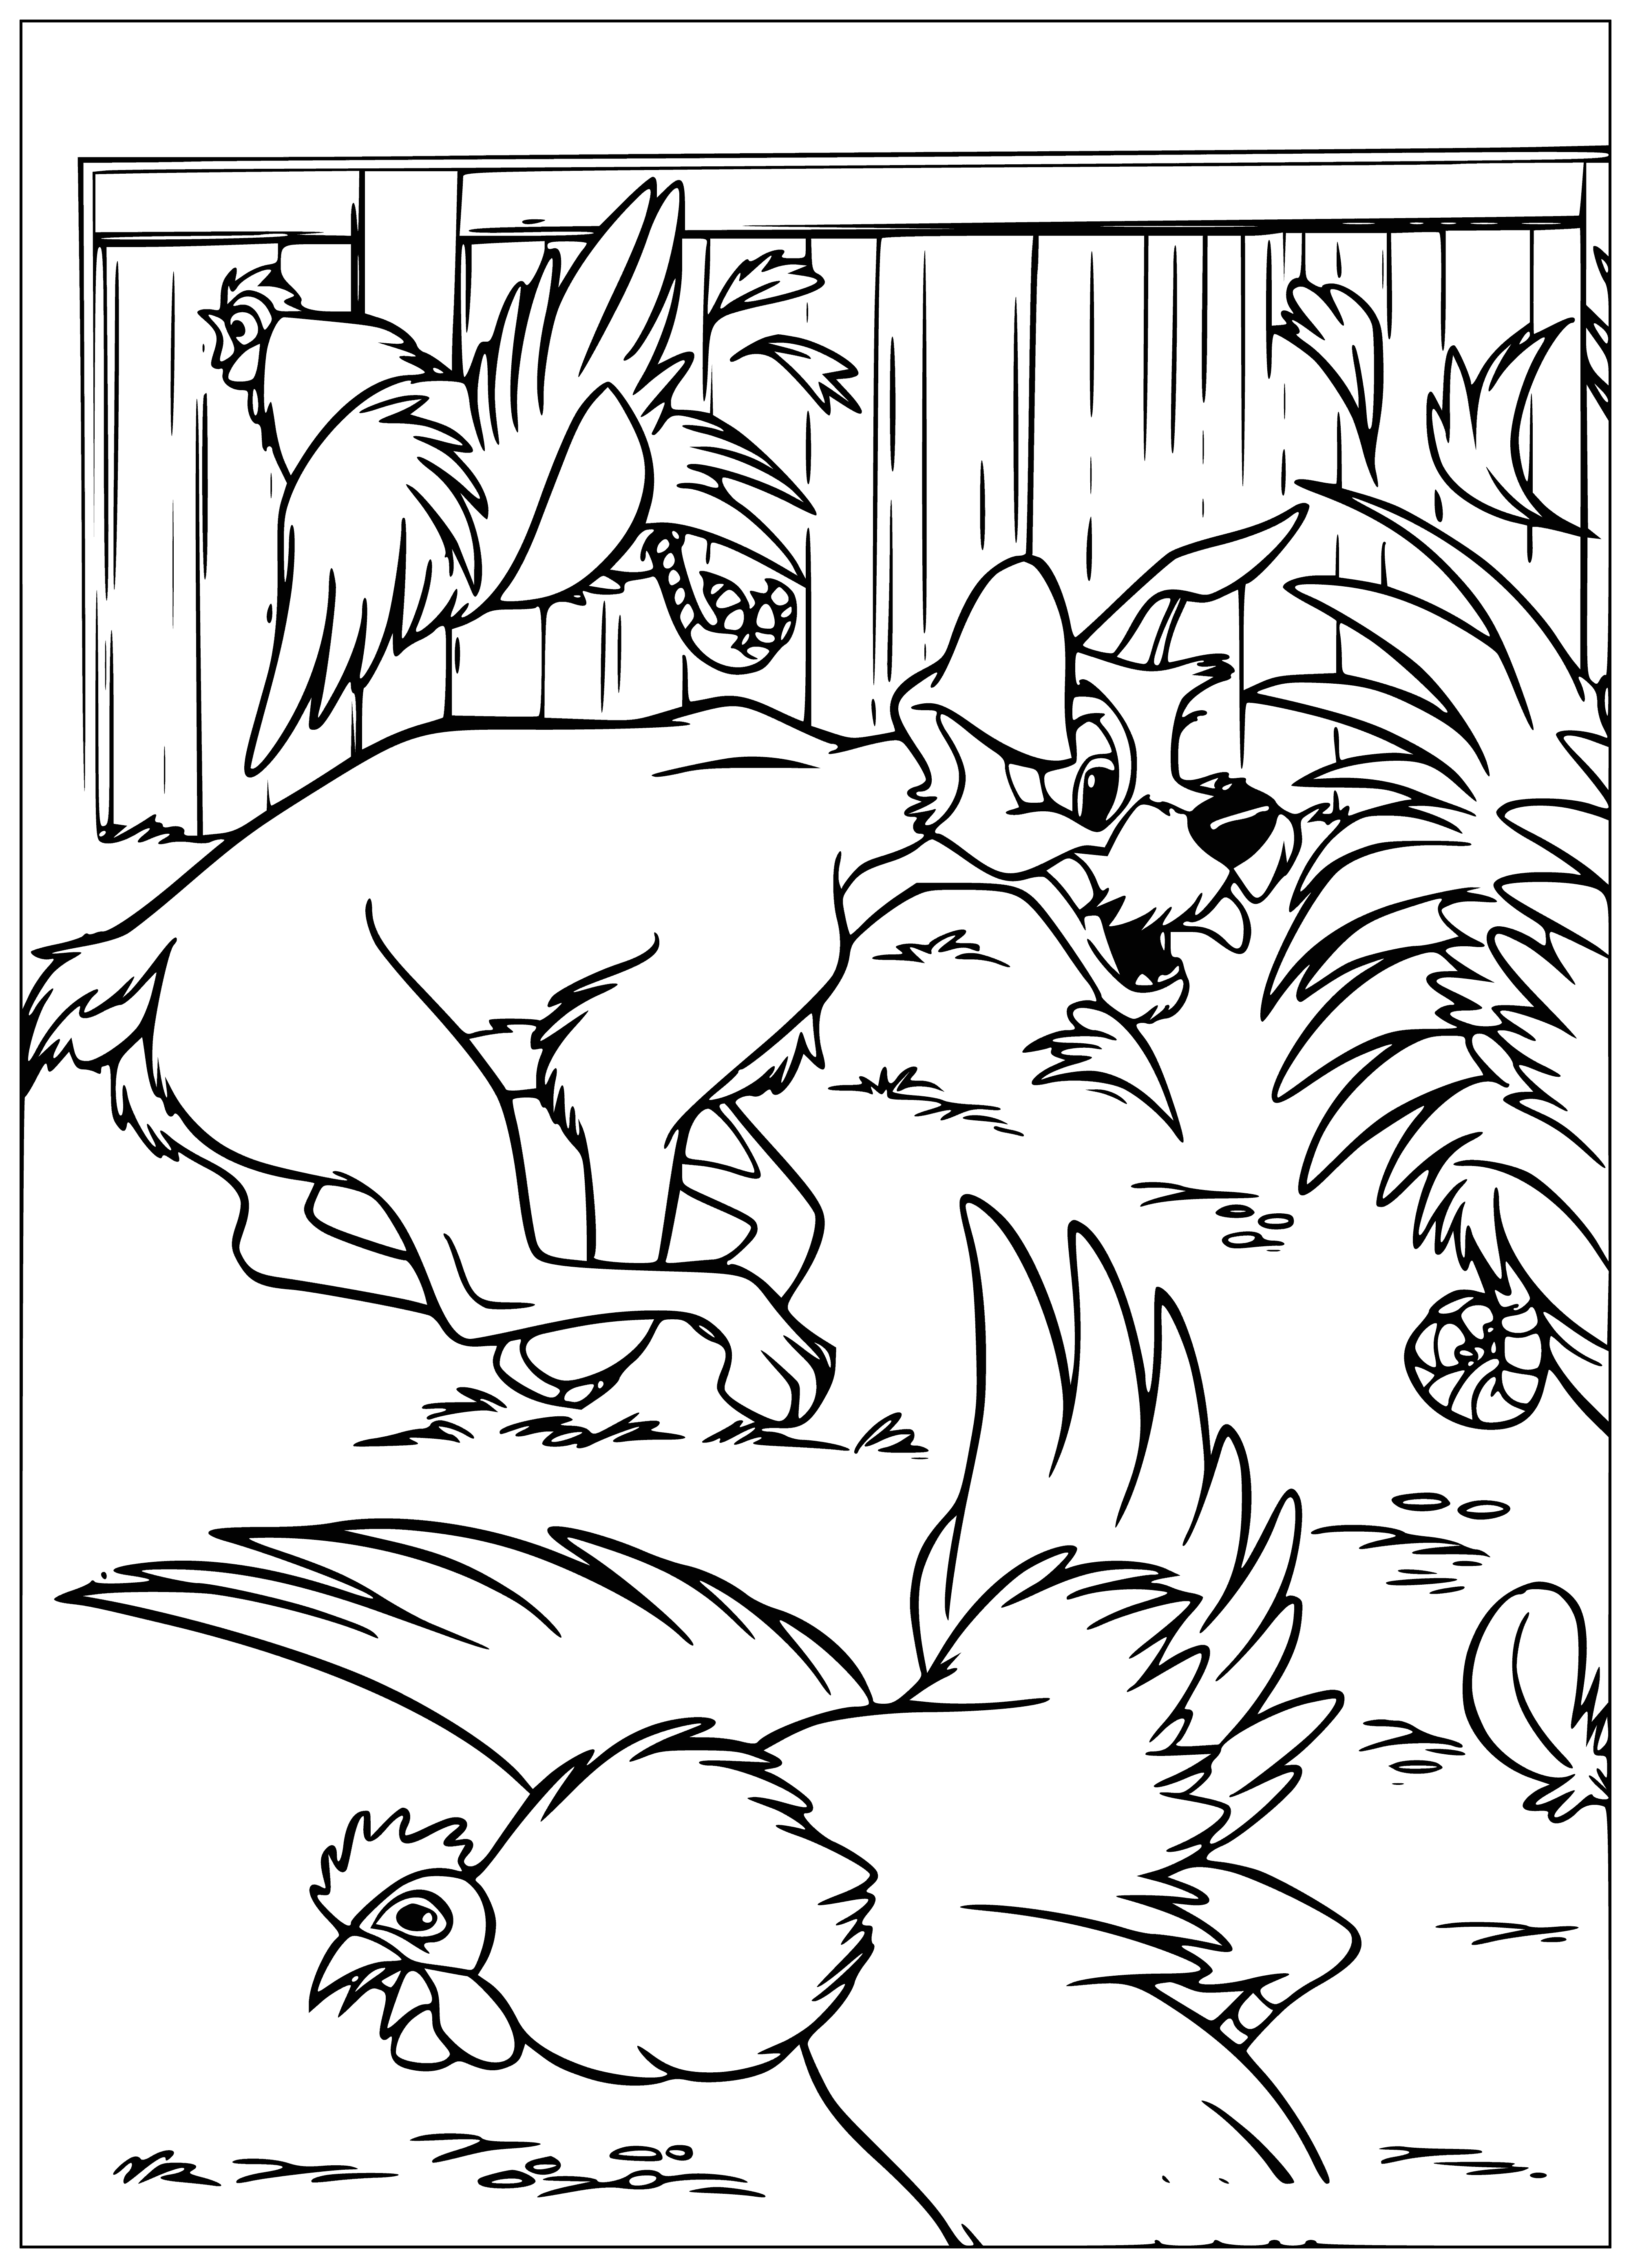 coloring page: Man & woman sit at a table -- woman holds chicken, man holds leash attached to brown & white dog by her feet.